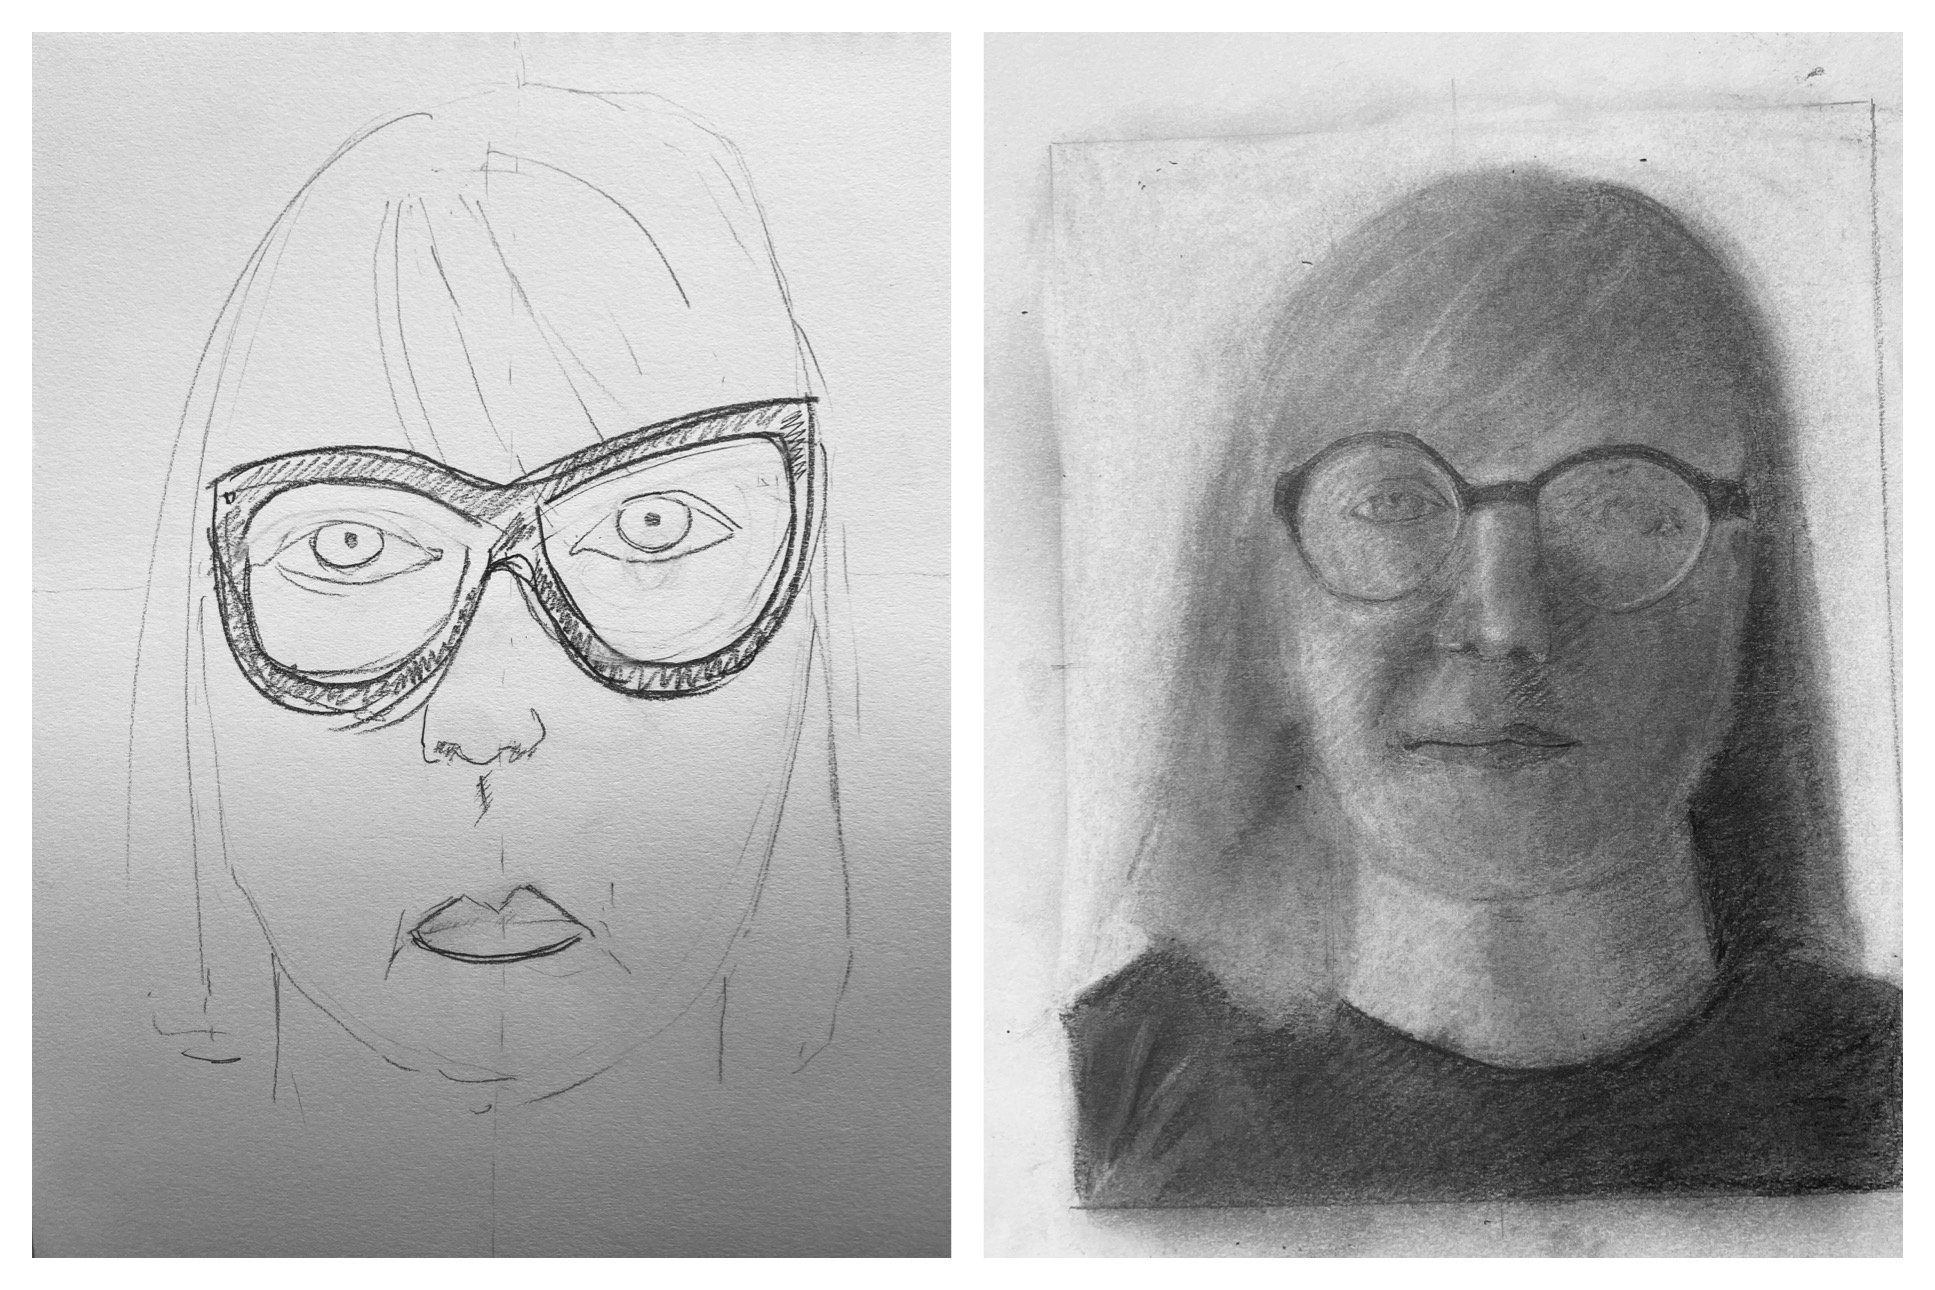 Nicci's Before and After Self-Portrait Drawings December 6-11, 2021